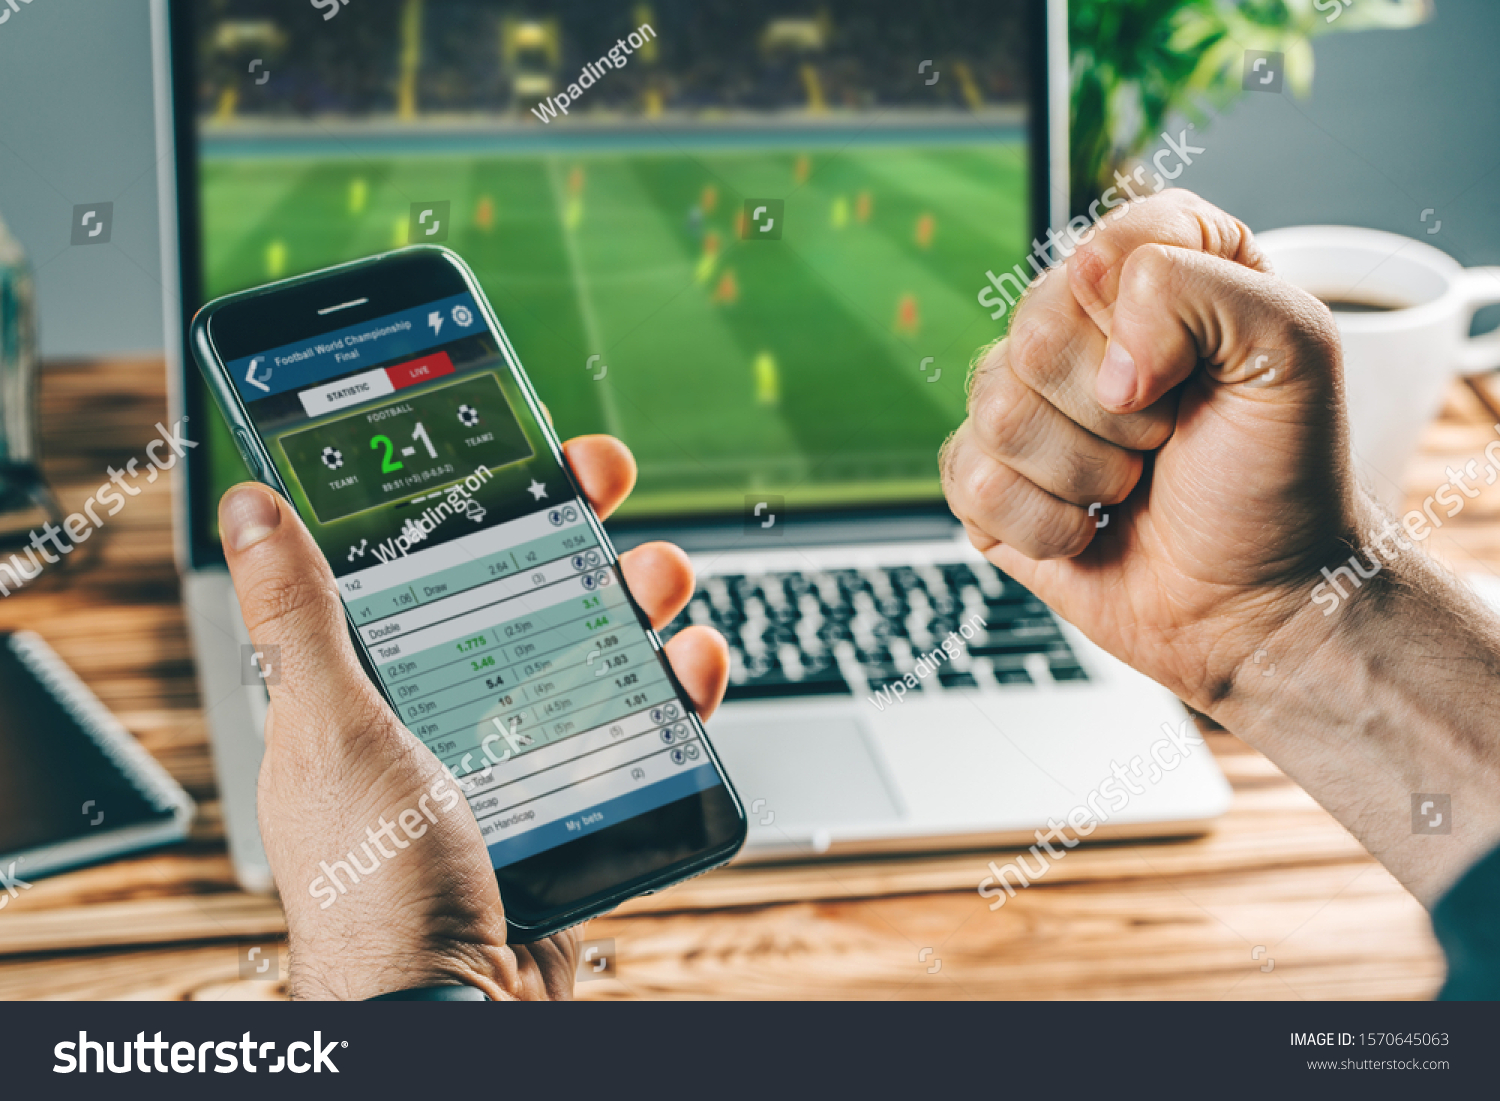 Man watching football play online broadcast on his laptop, cheering for his favourite team, making bets at bookmaker's website. #1570645063